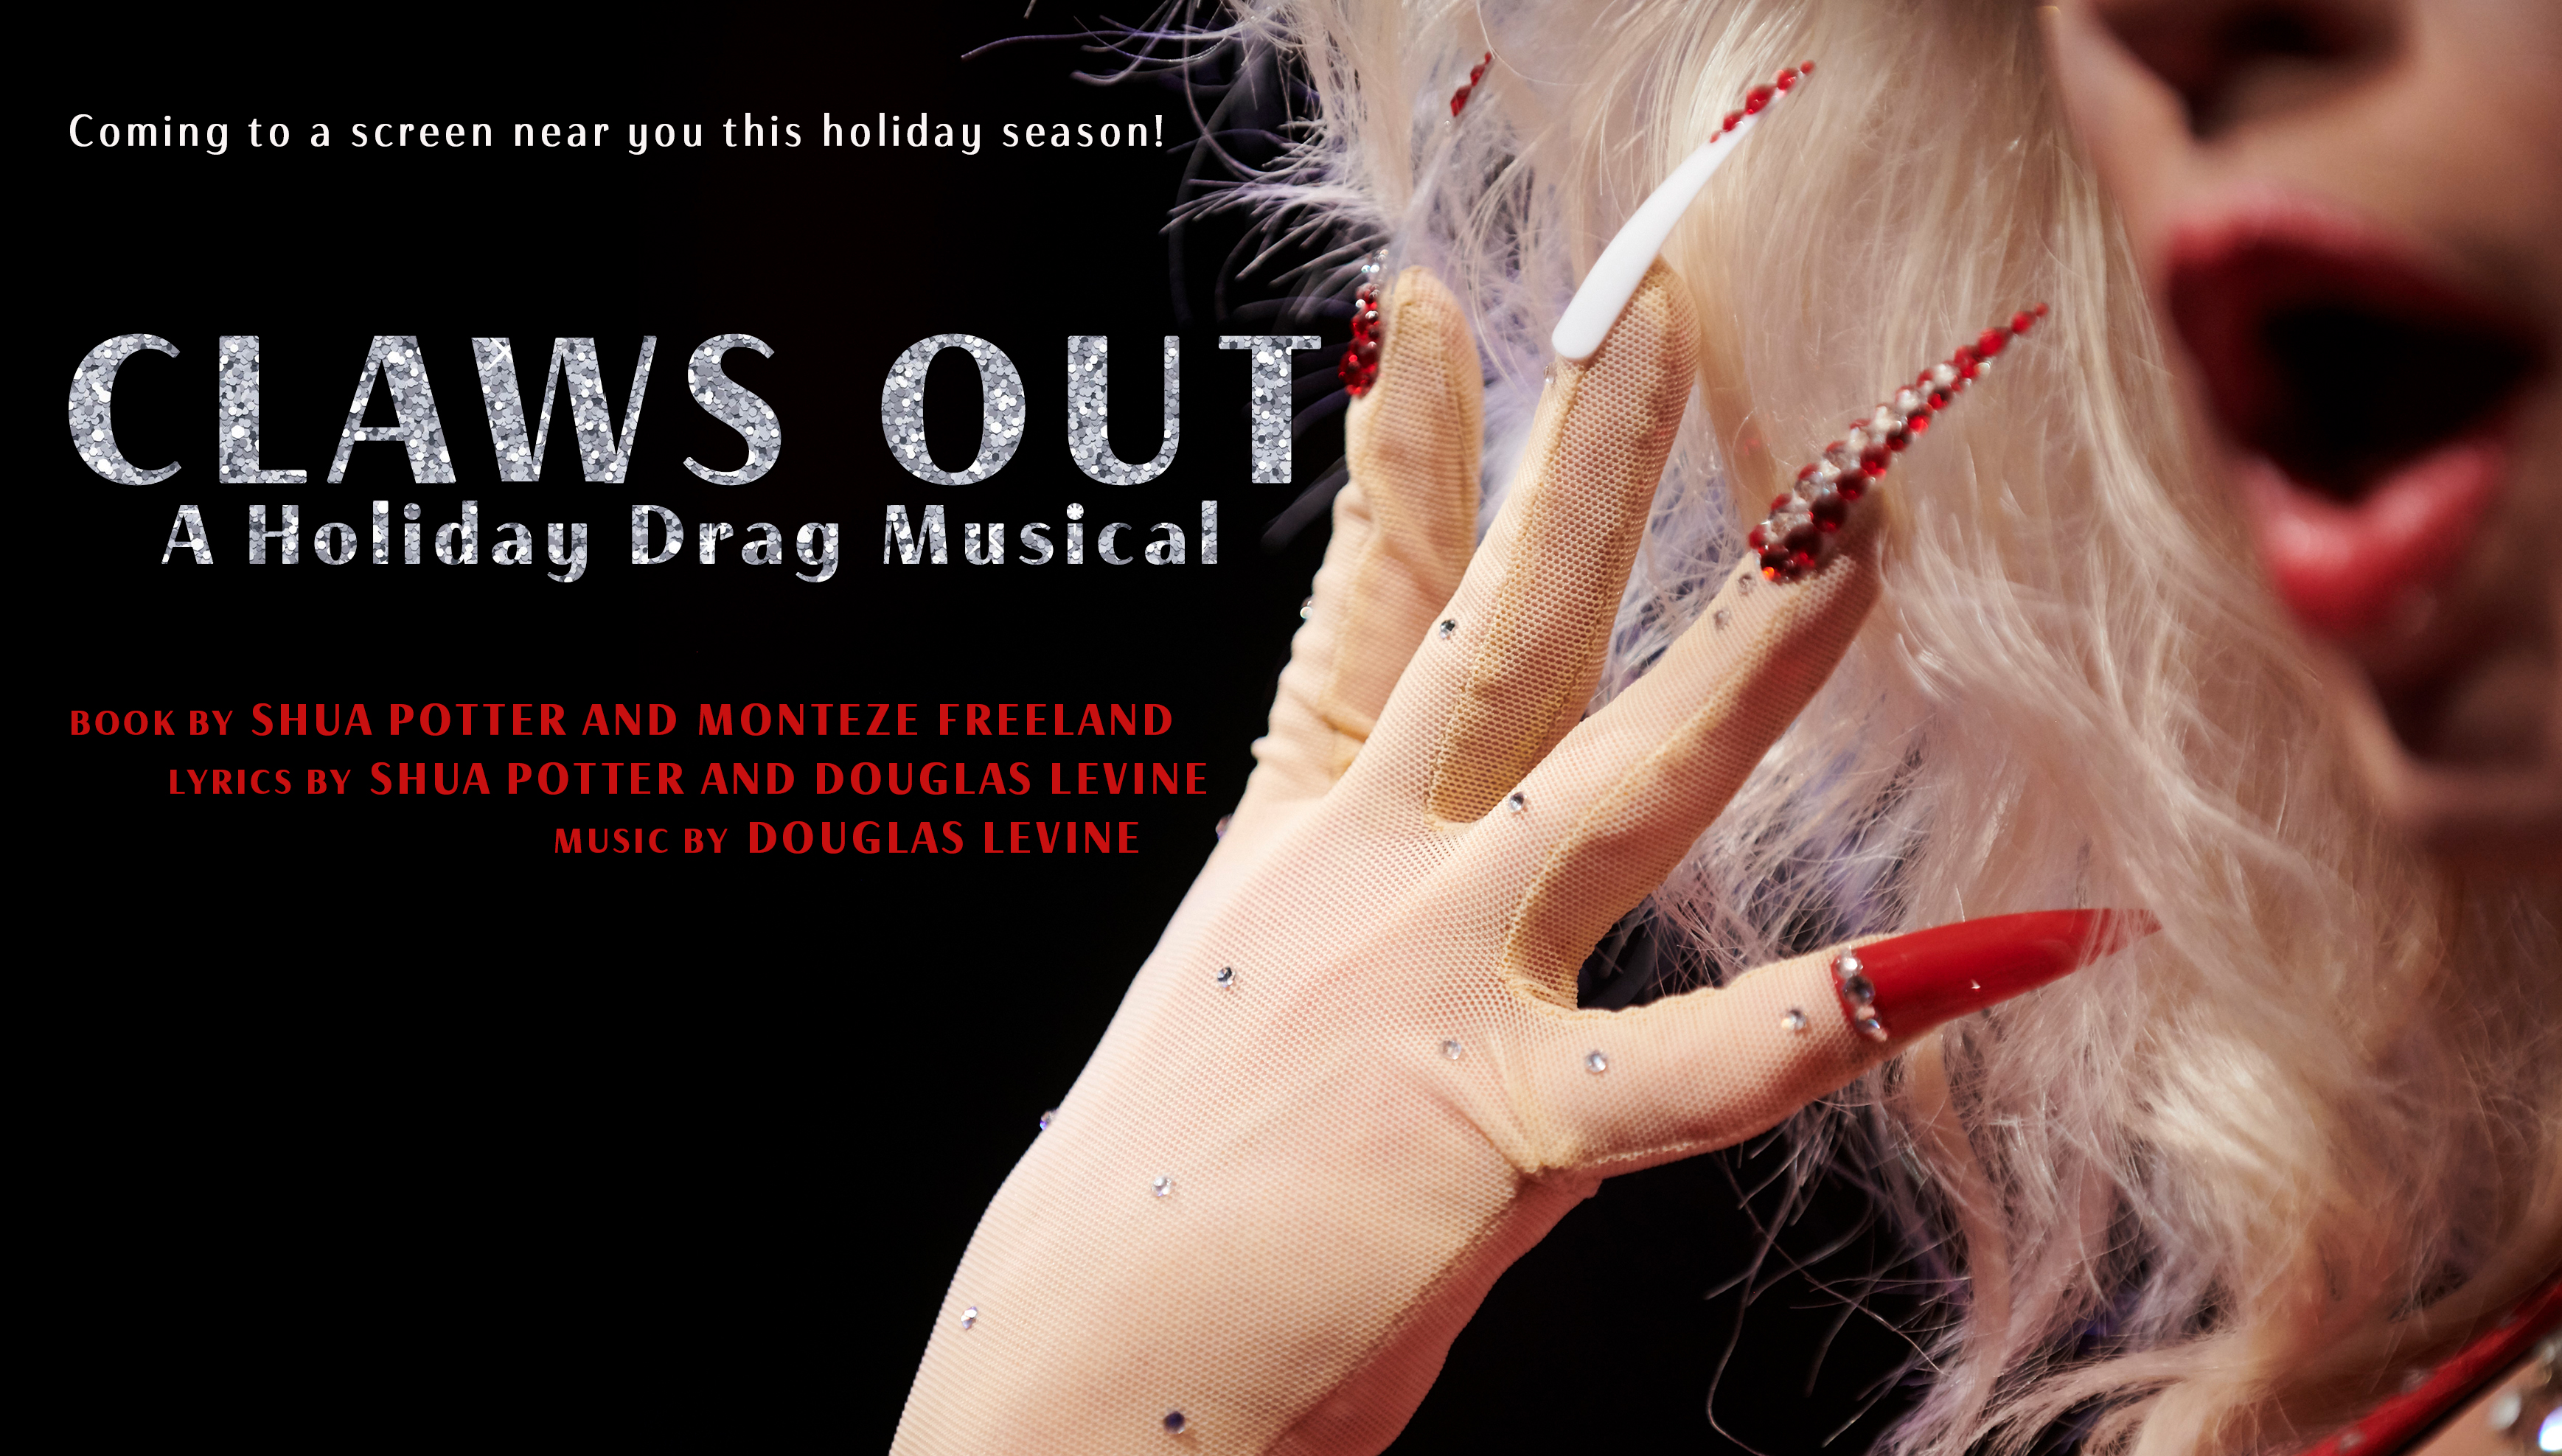 CLAWS OUT: A Holiday Drag Musical artwork